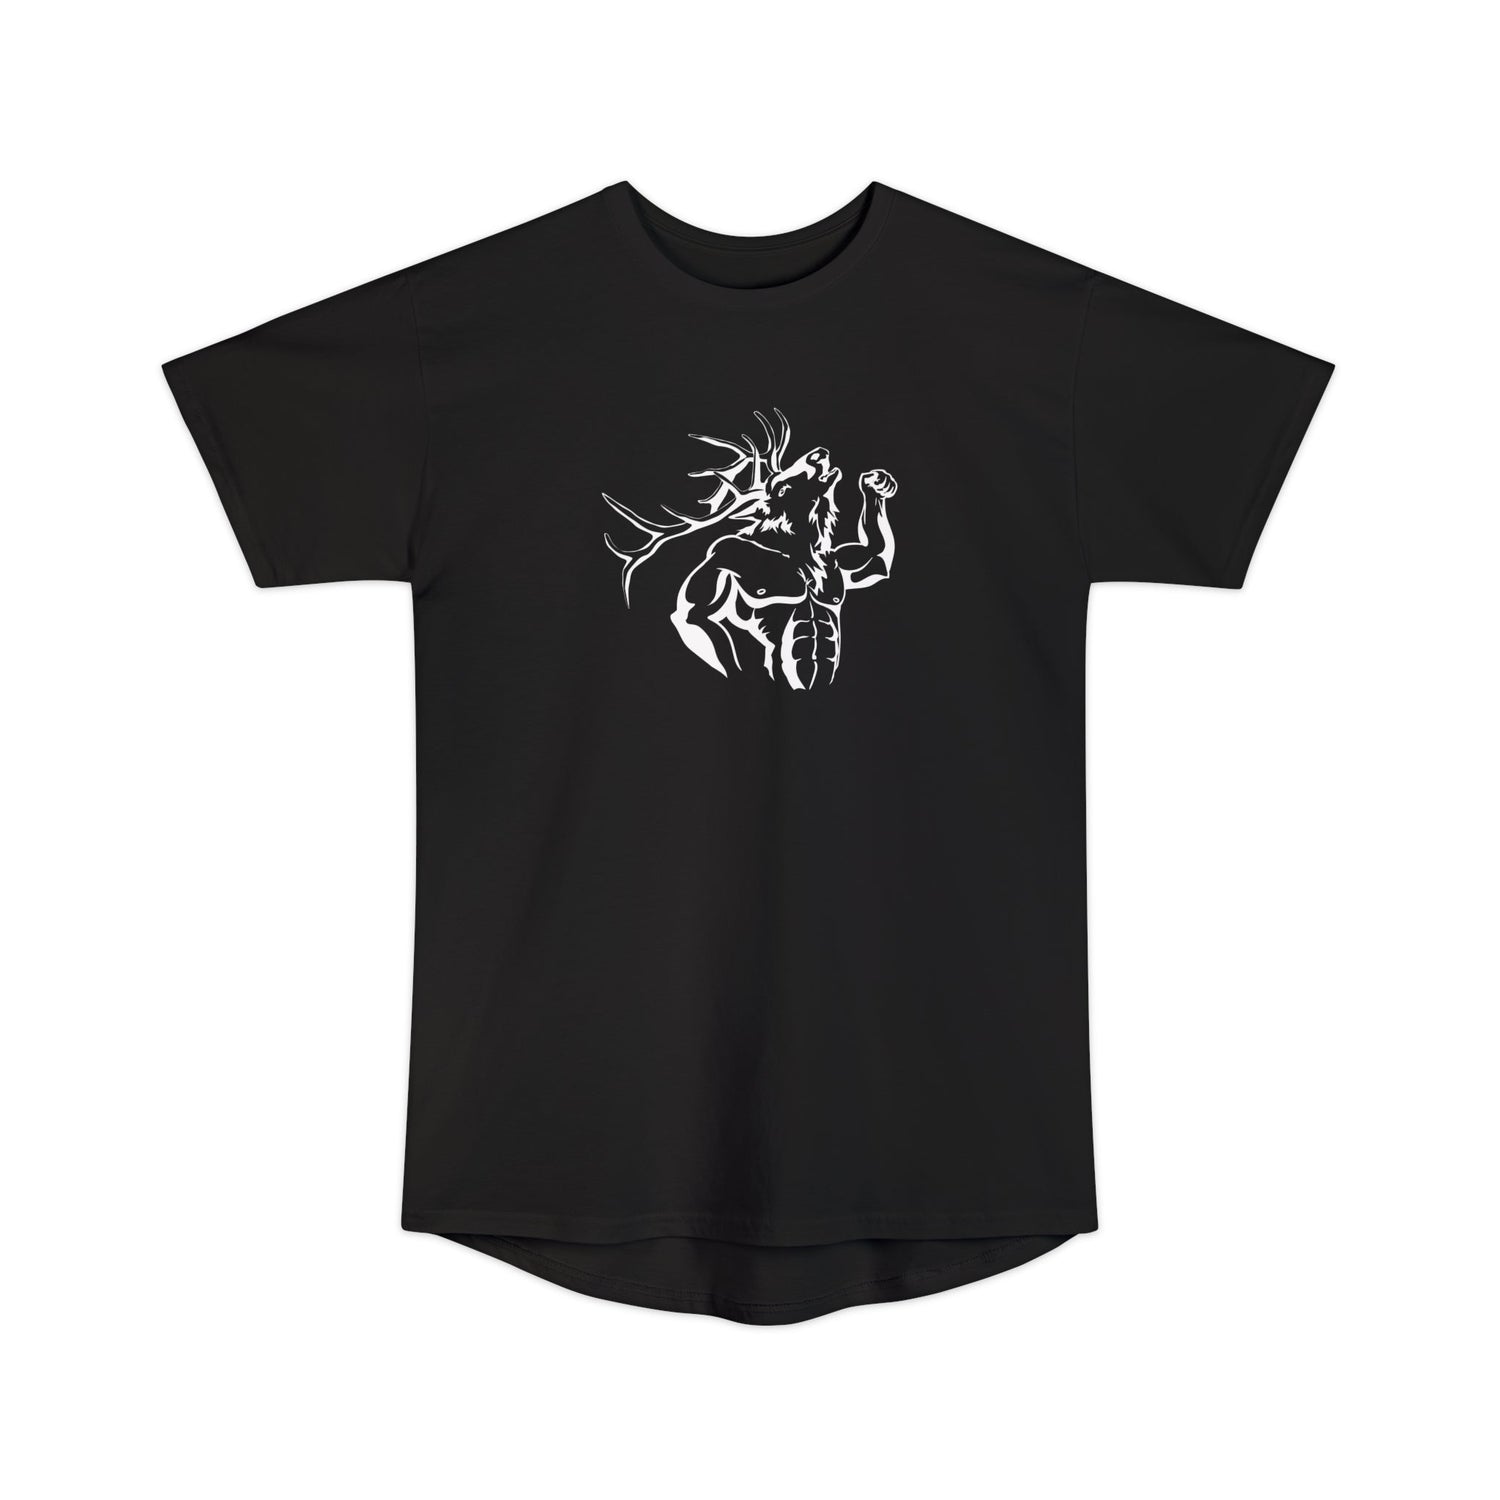 Athletic tall elk hunting t-shirt, color black, front design placement